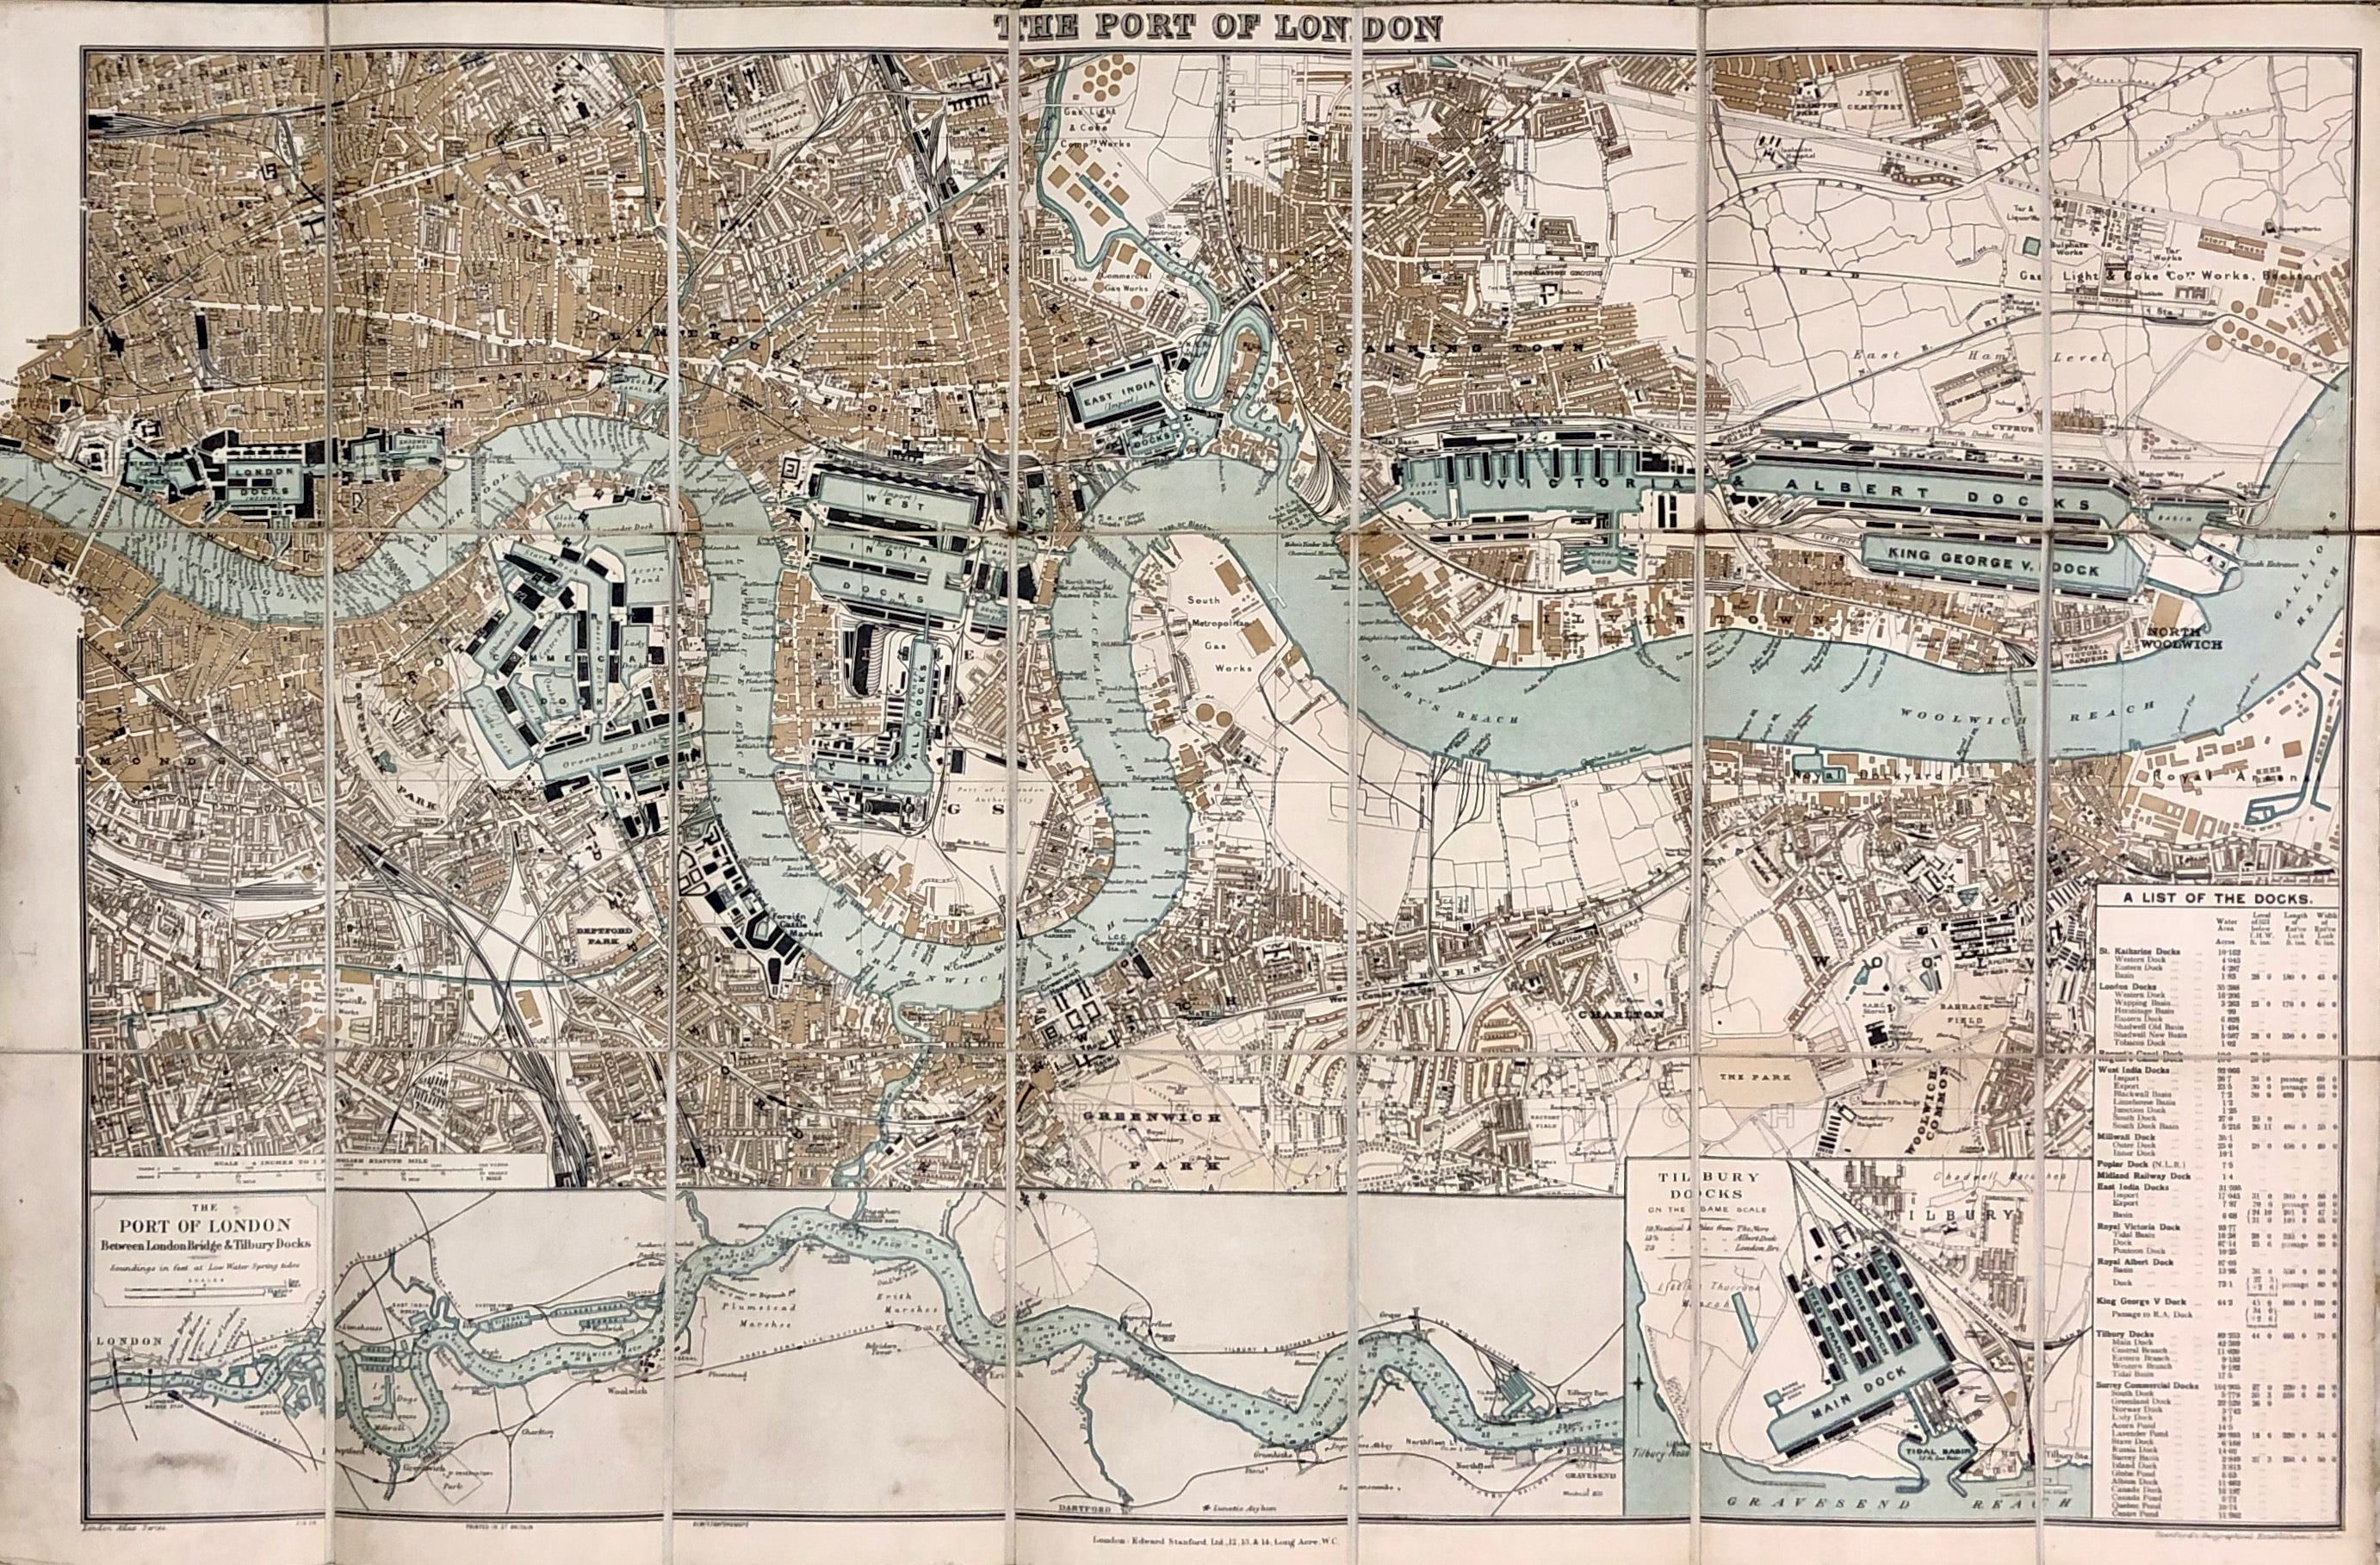 London Atlas Map of the Port of London